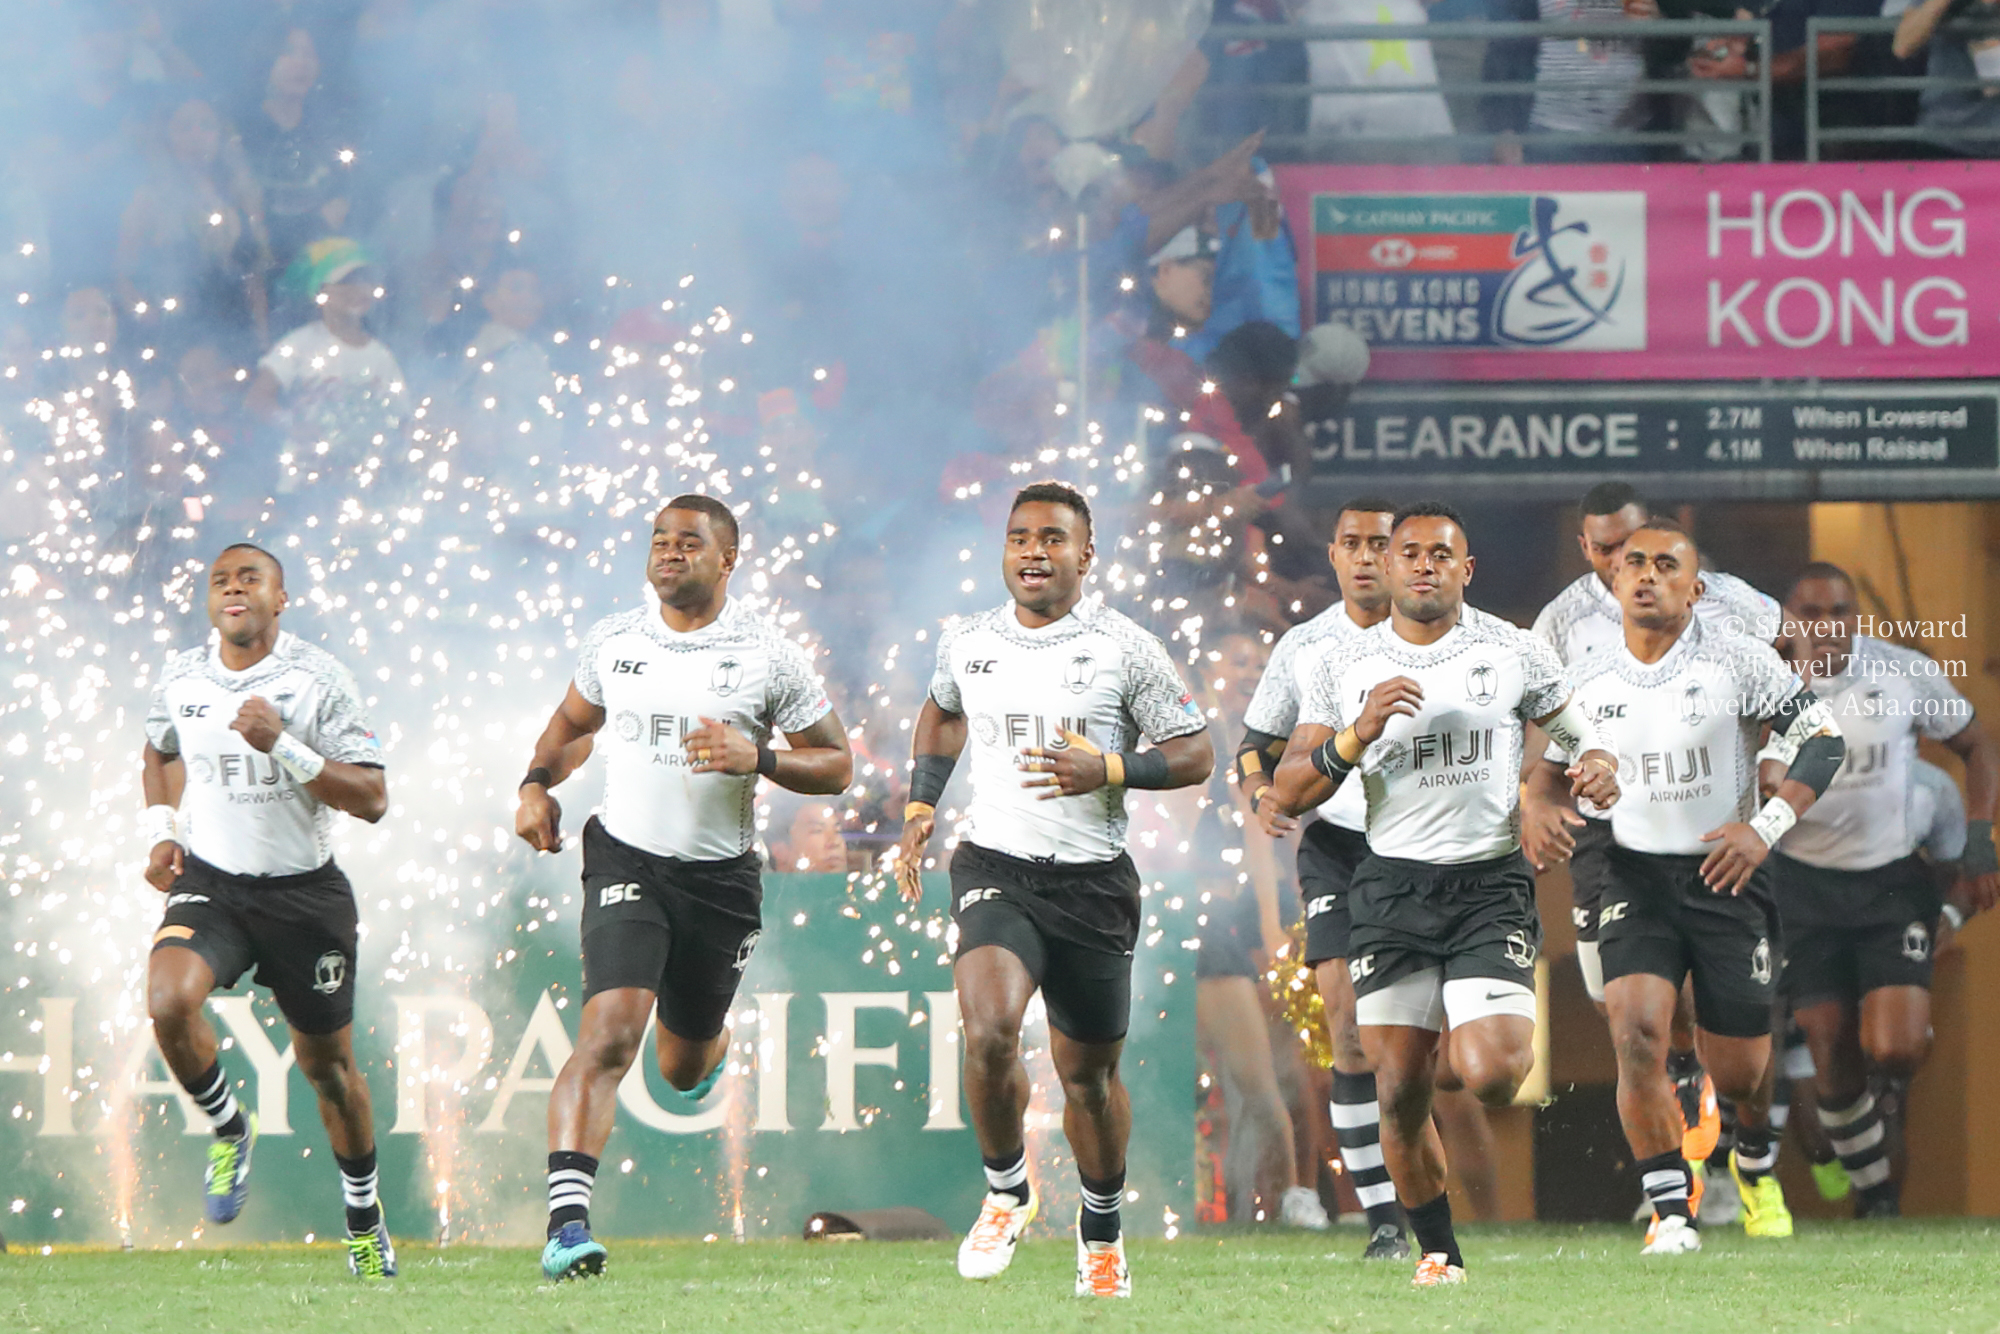 Fiji run out for the final of the 2018 Cathay Pacific / HSBC Hong Kong Sevens against Kenya. Picture taken by Steven Howard of TravelNewsAsia.com Click to enlarge.